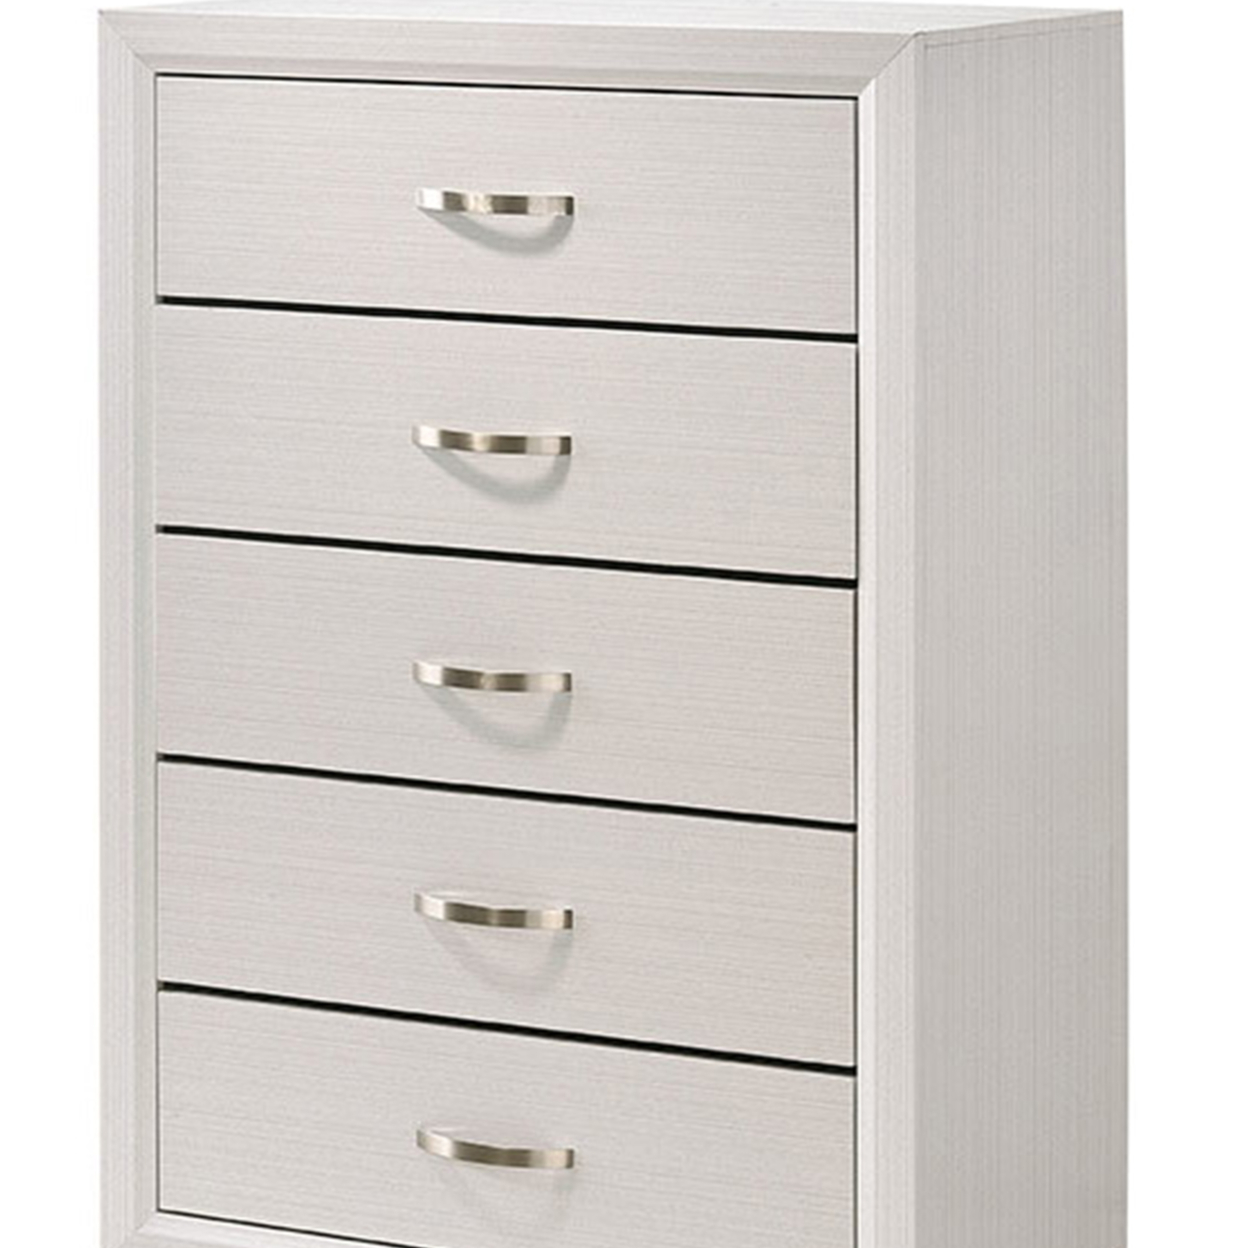 Transitional 5 Drawer Chest With Curved Handle And Chamfered Feet, White- Saltoro Sherpi